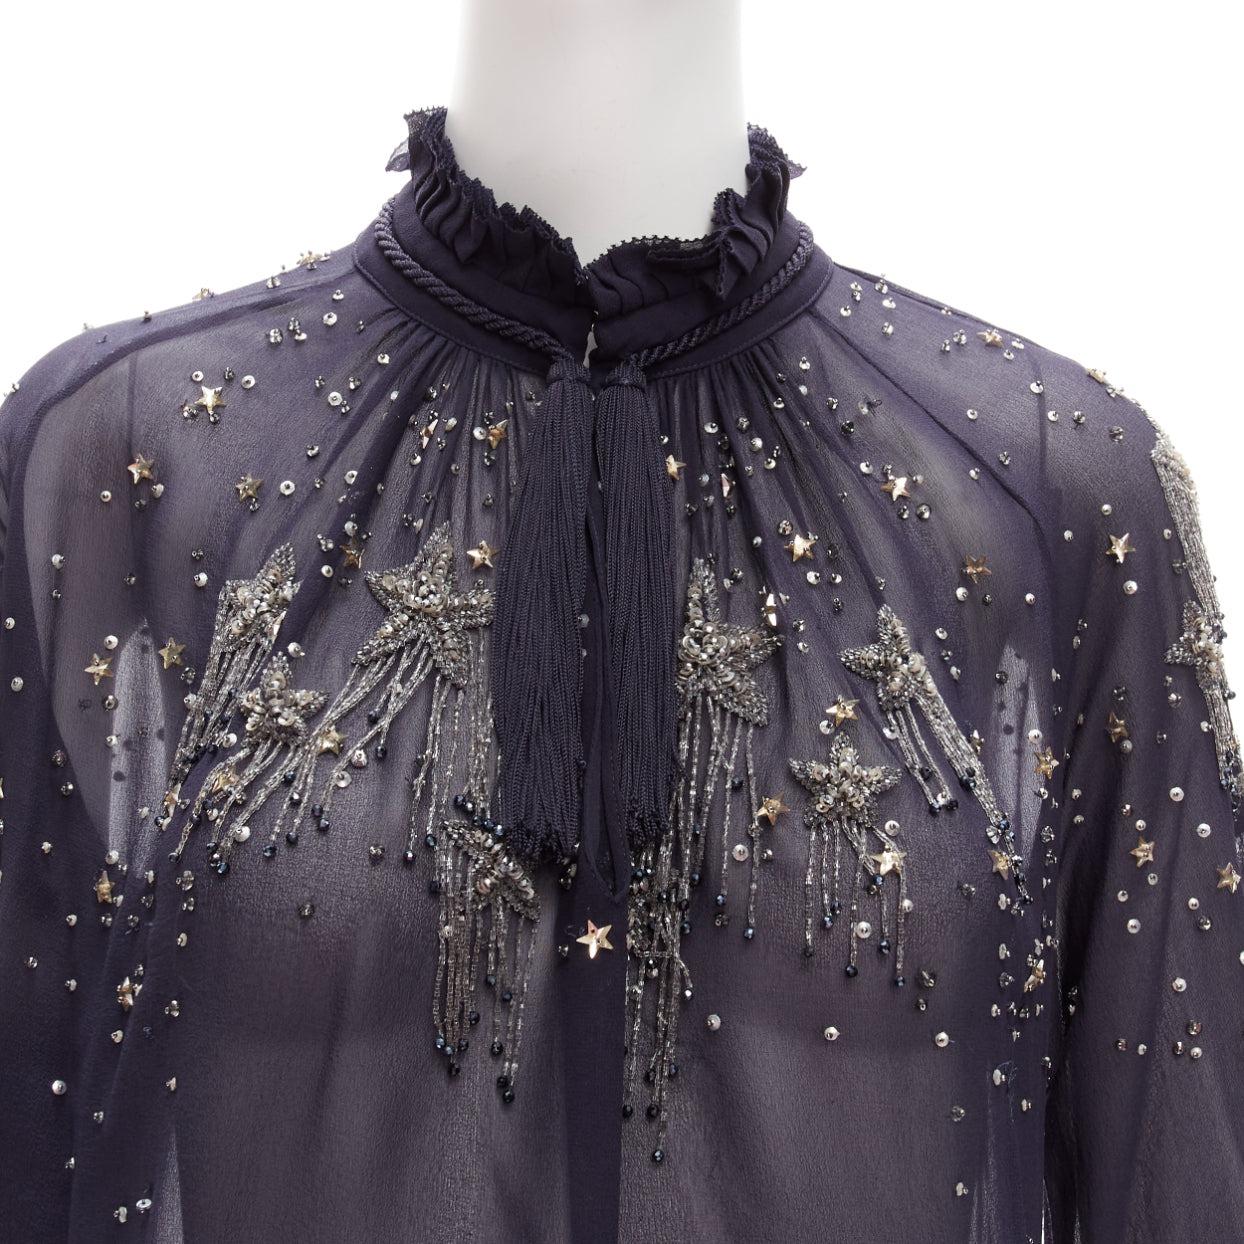 ROBERTO CAVALLI navy silky bead embellished ruffle collar sheer blouse
Reference: JACG/A00117
Brand: Roberto Cavalli
Material: Fabric
Color: Navy, Silver
Pattern: Star
Closure: Hook & Eye
Extra Details: Star motive beading also at back. Pleated